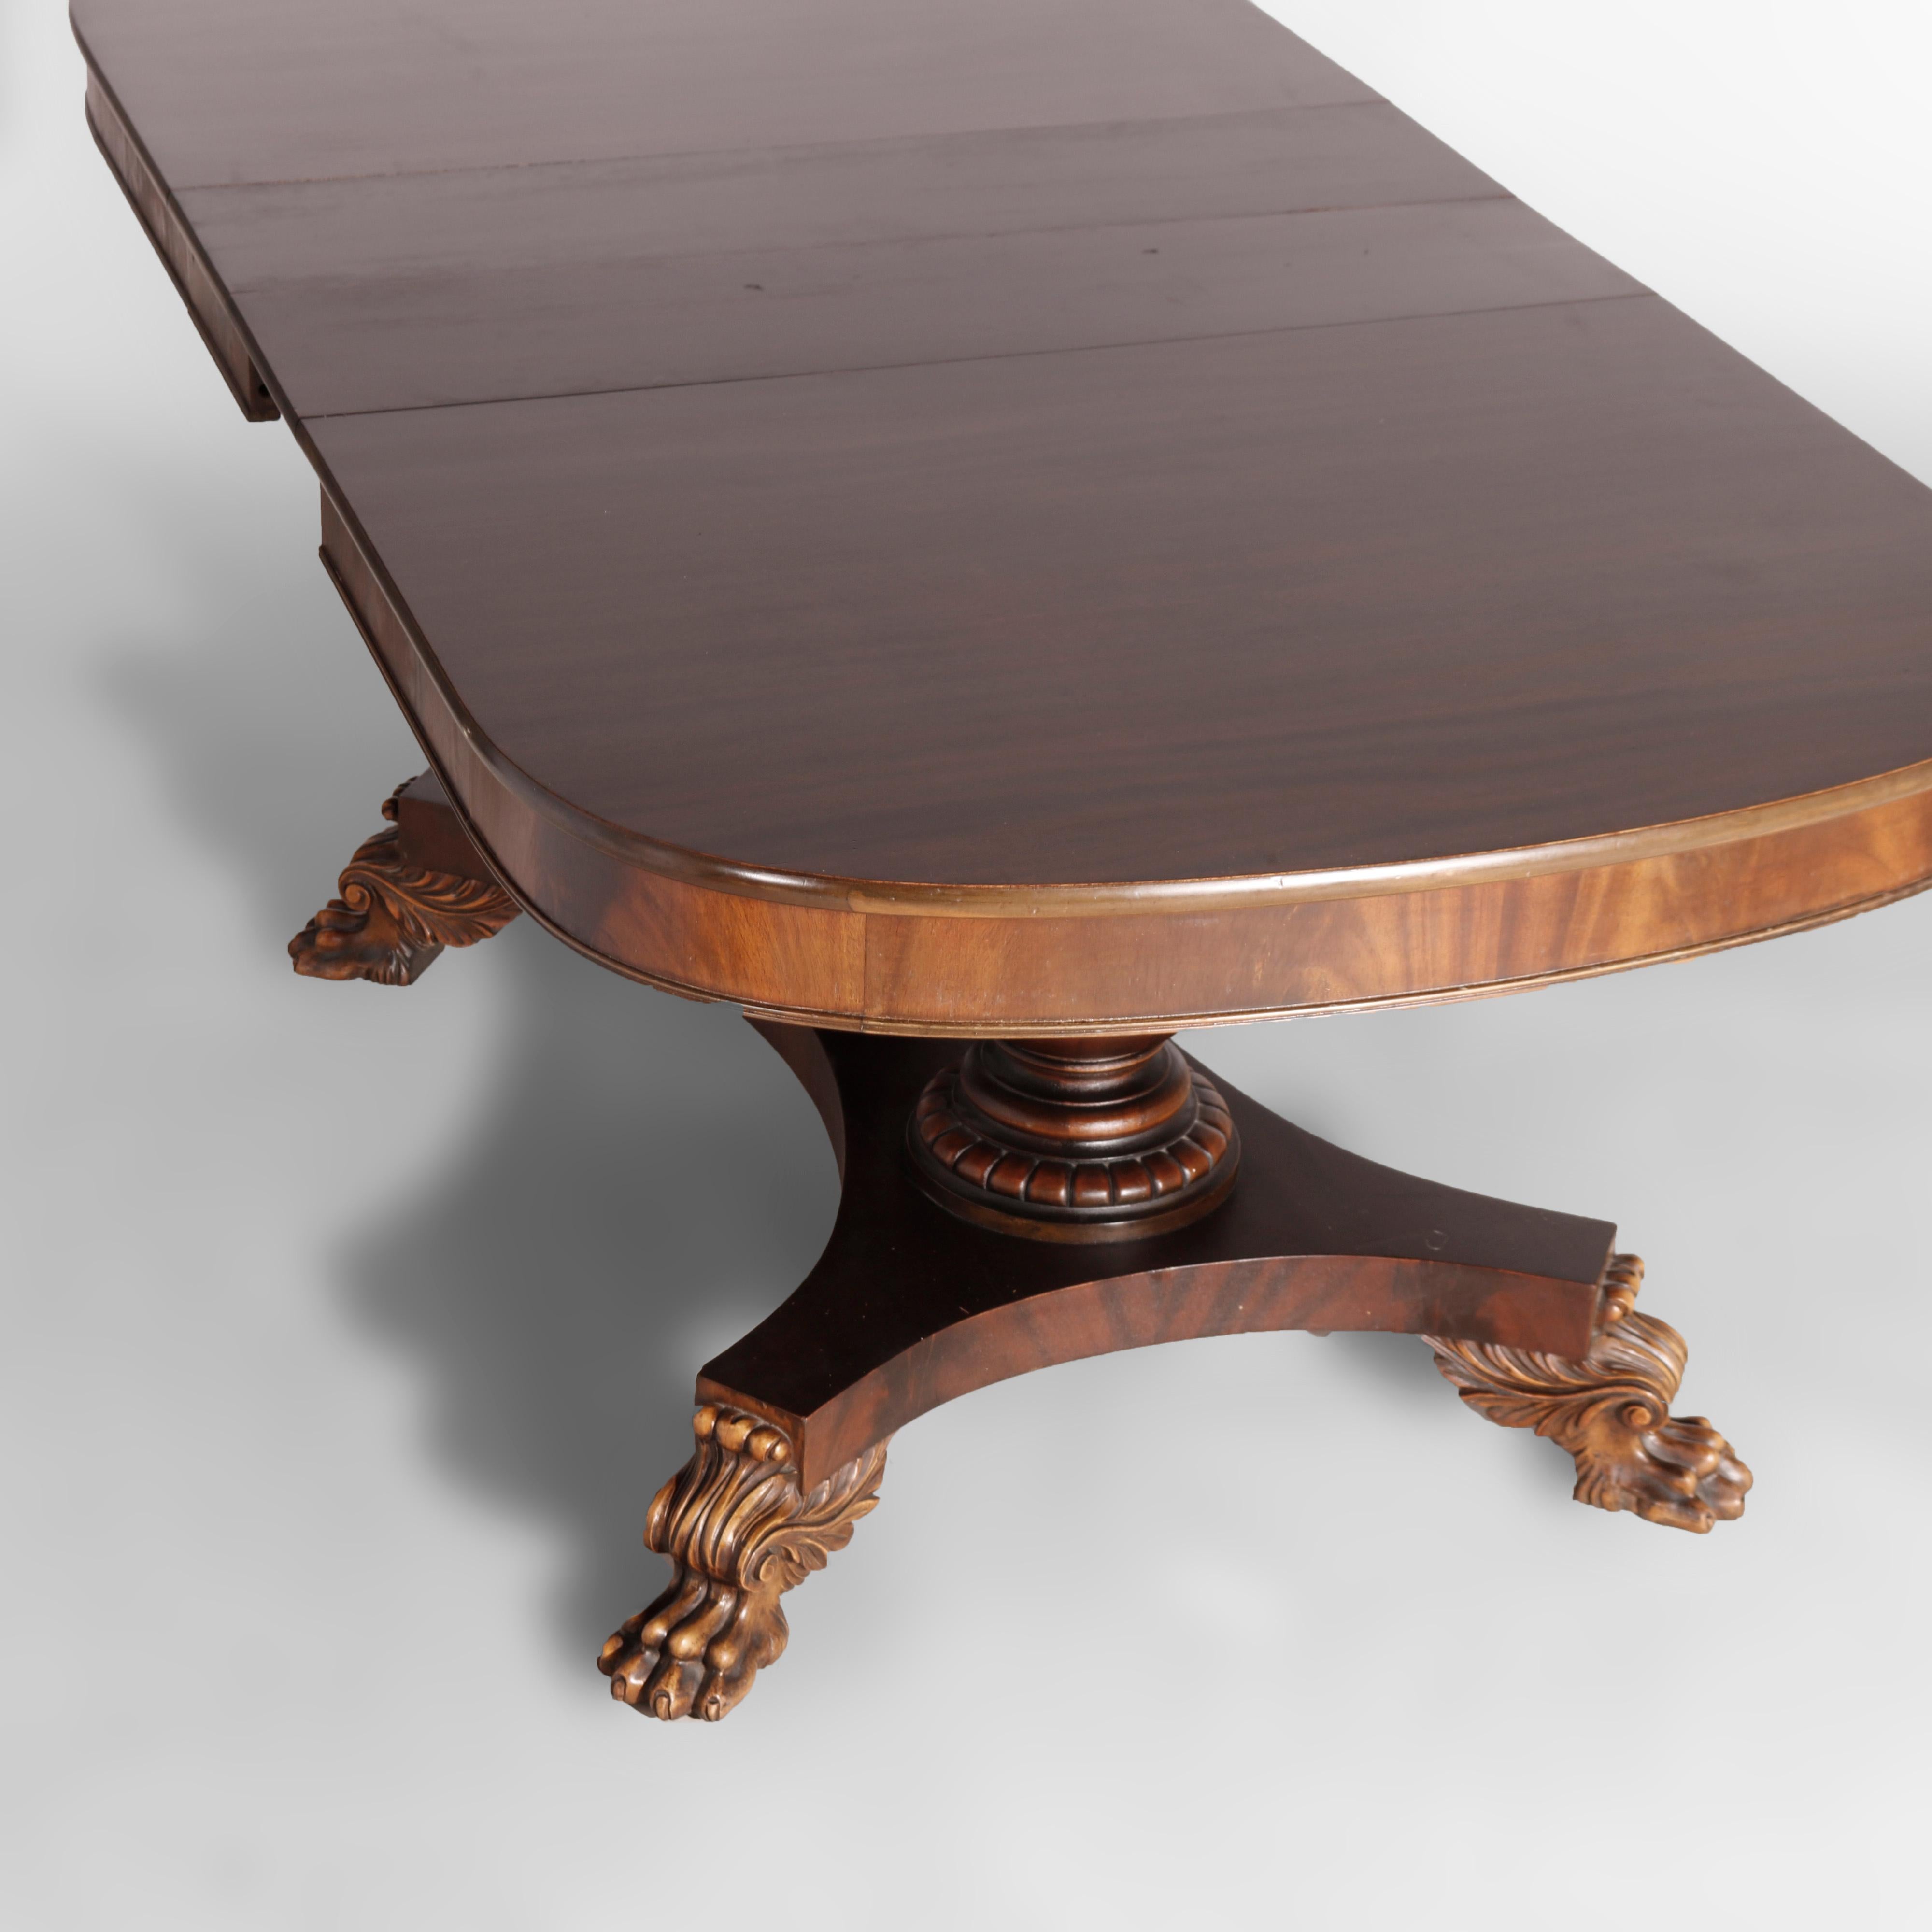 American Antique Berkey & Gay Carved Flame Mahogany Extension Dining Table & Leaves C1930